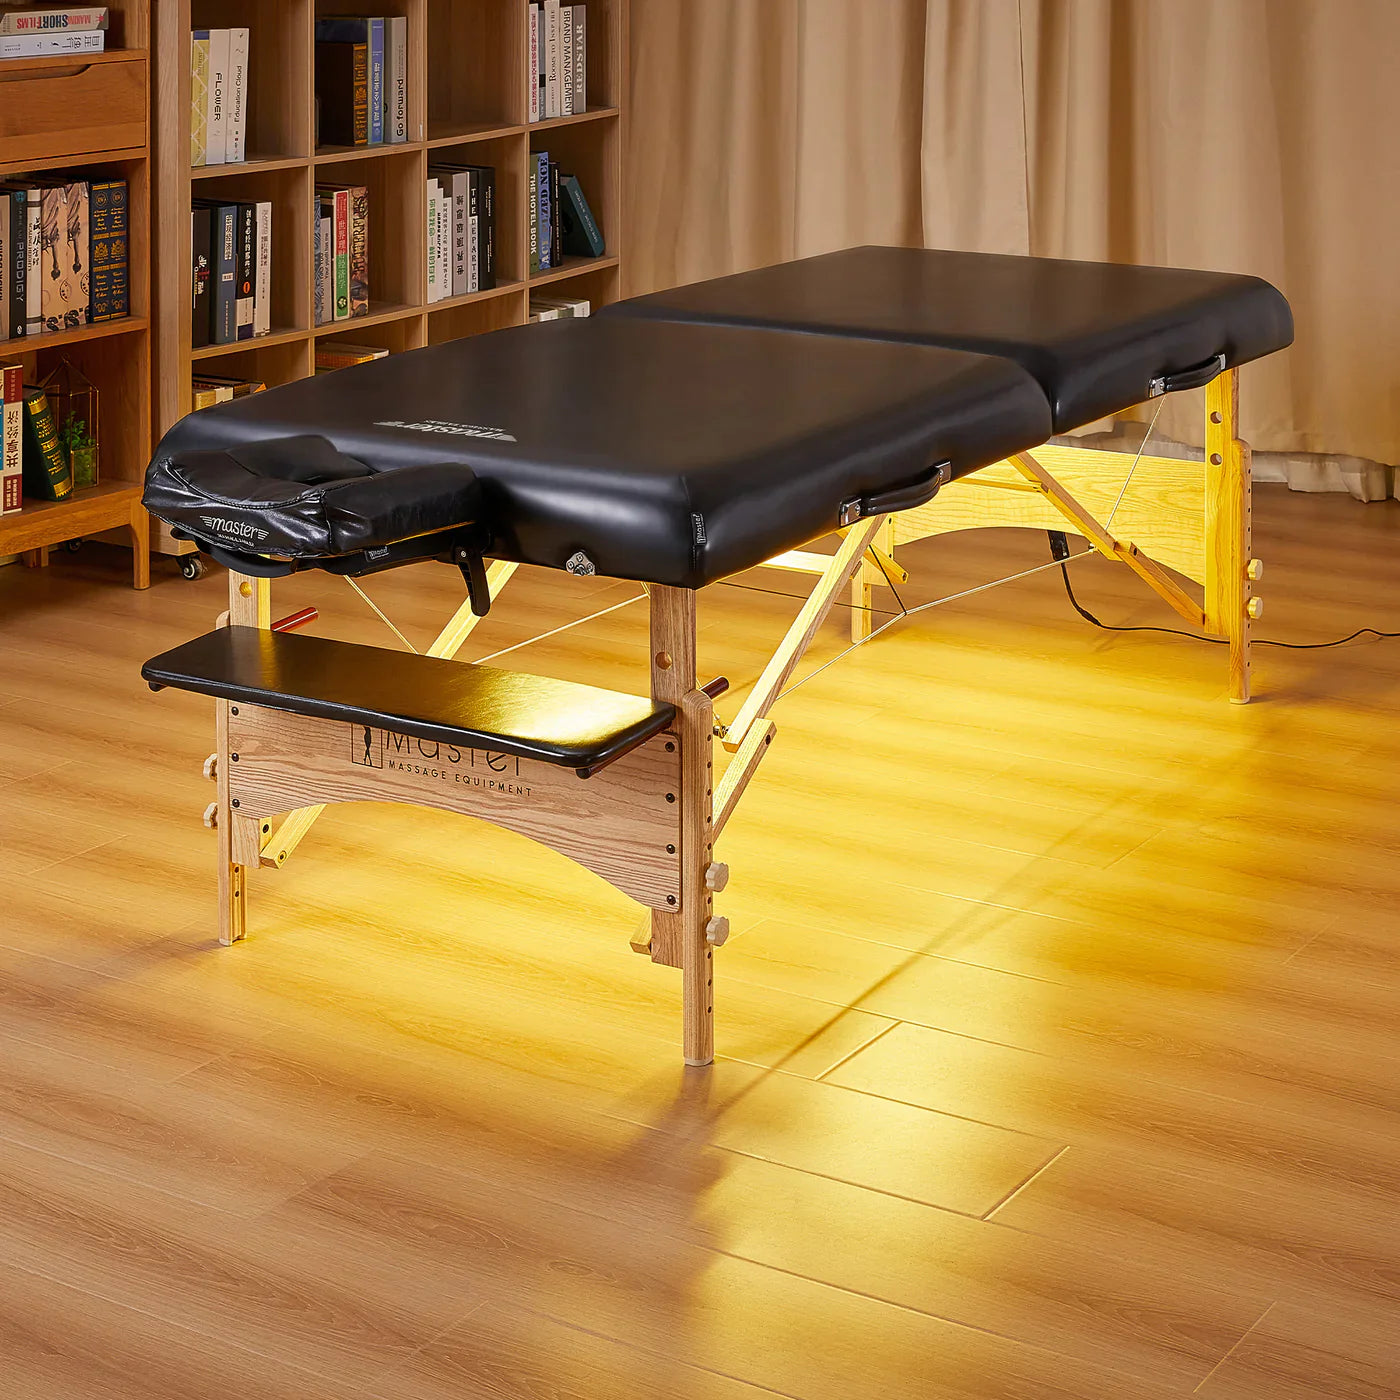 Bella2bello Galaxy Ambient Lighting System for Massage Tables – Atmosphere Light, Warm 3500K LED Strips